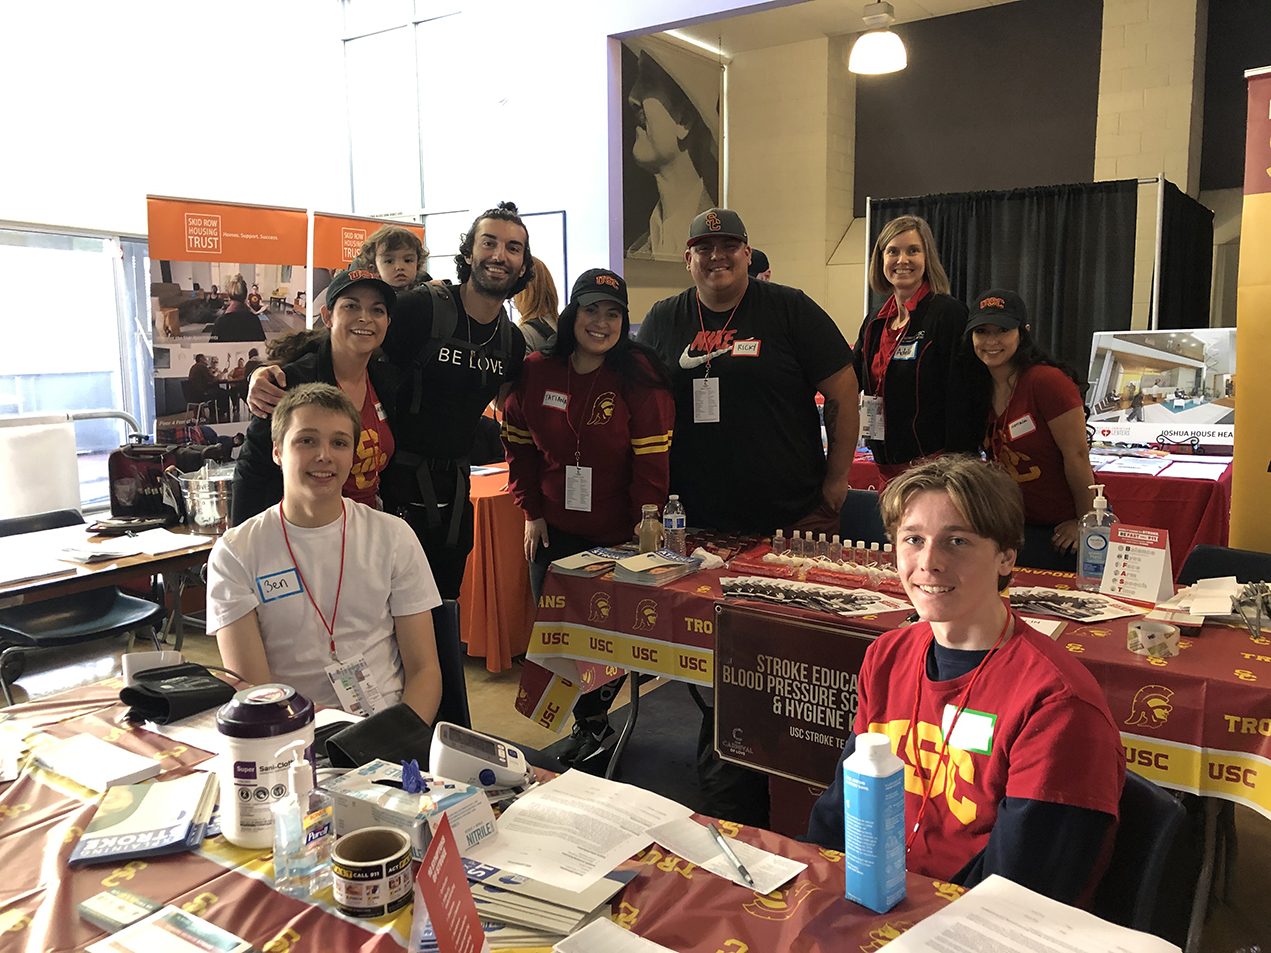 On January 25th, the Keck Medicine of USC Stroke Program and the Nurses of USC participated in the Wayfarer Foundation’s Skid Row Carnival of Love.